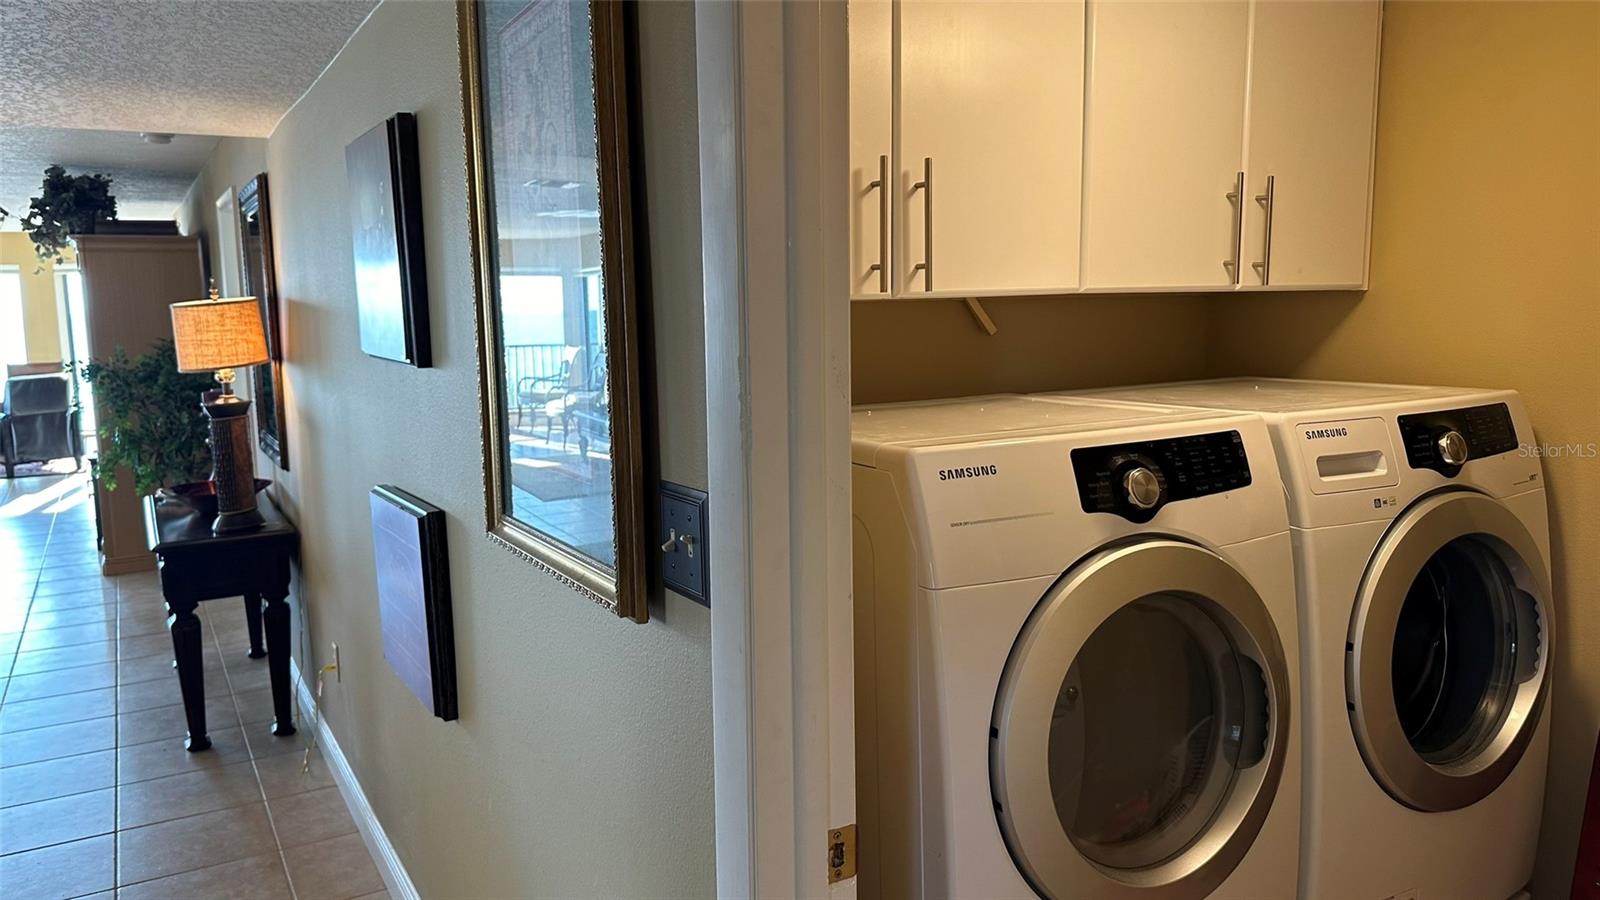 Laundry Room in Hall Foyer